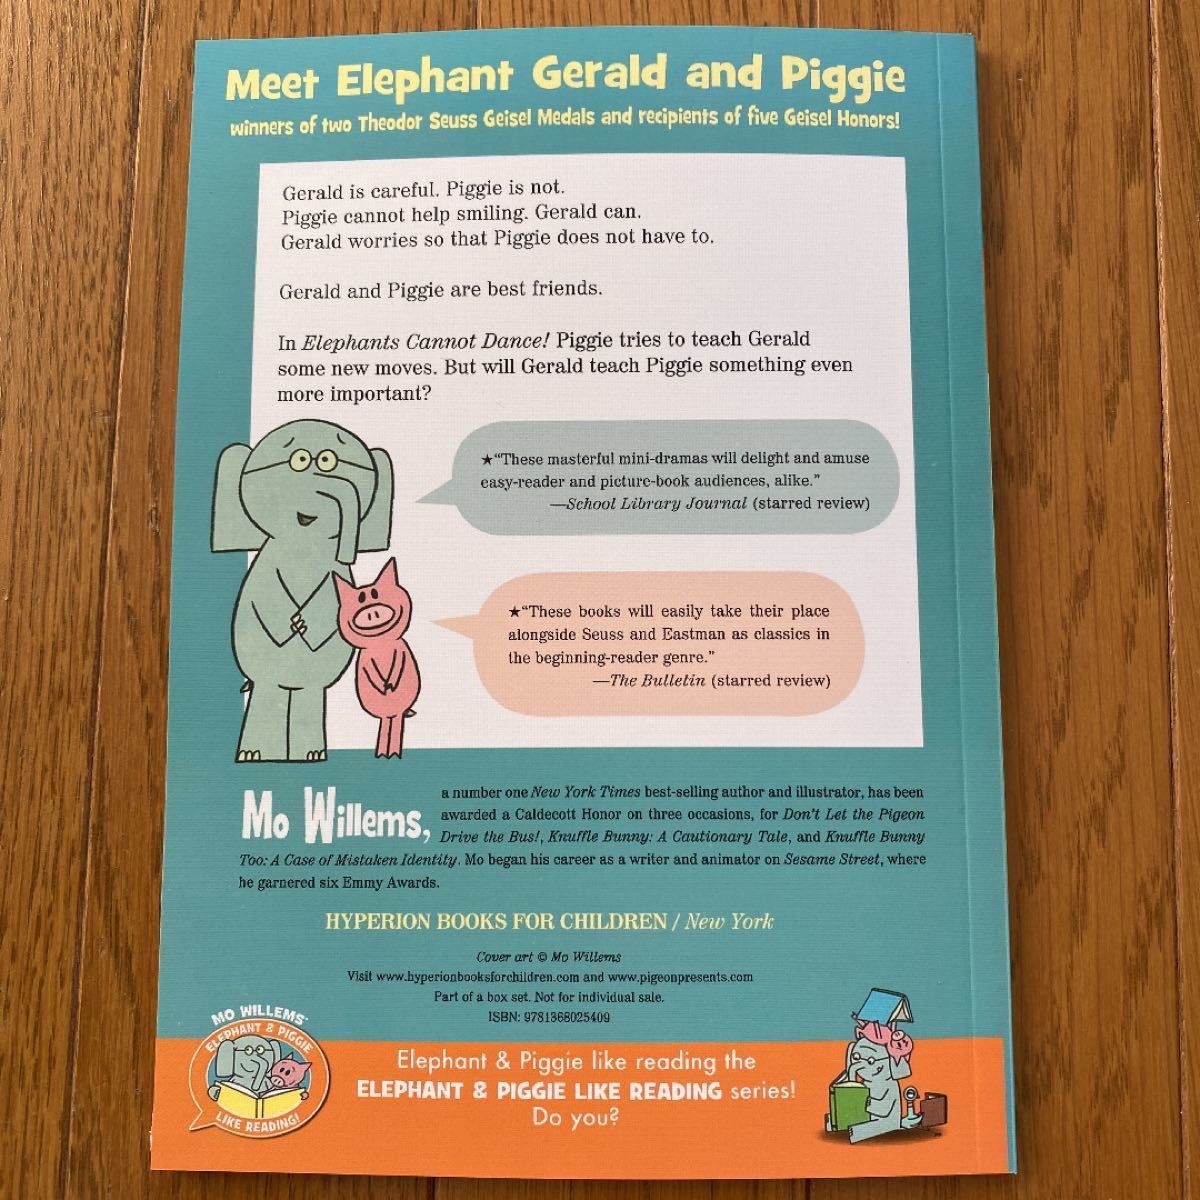 An Elephant and Piggie 5冊セット mo willems 英語多読 英語絵本 洋書